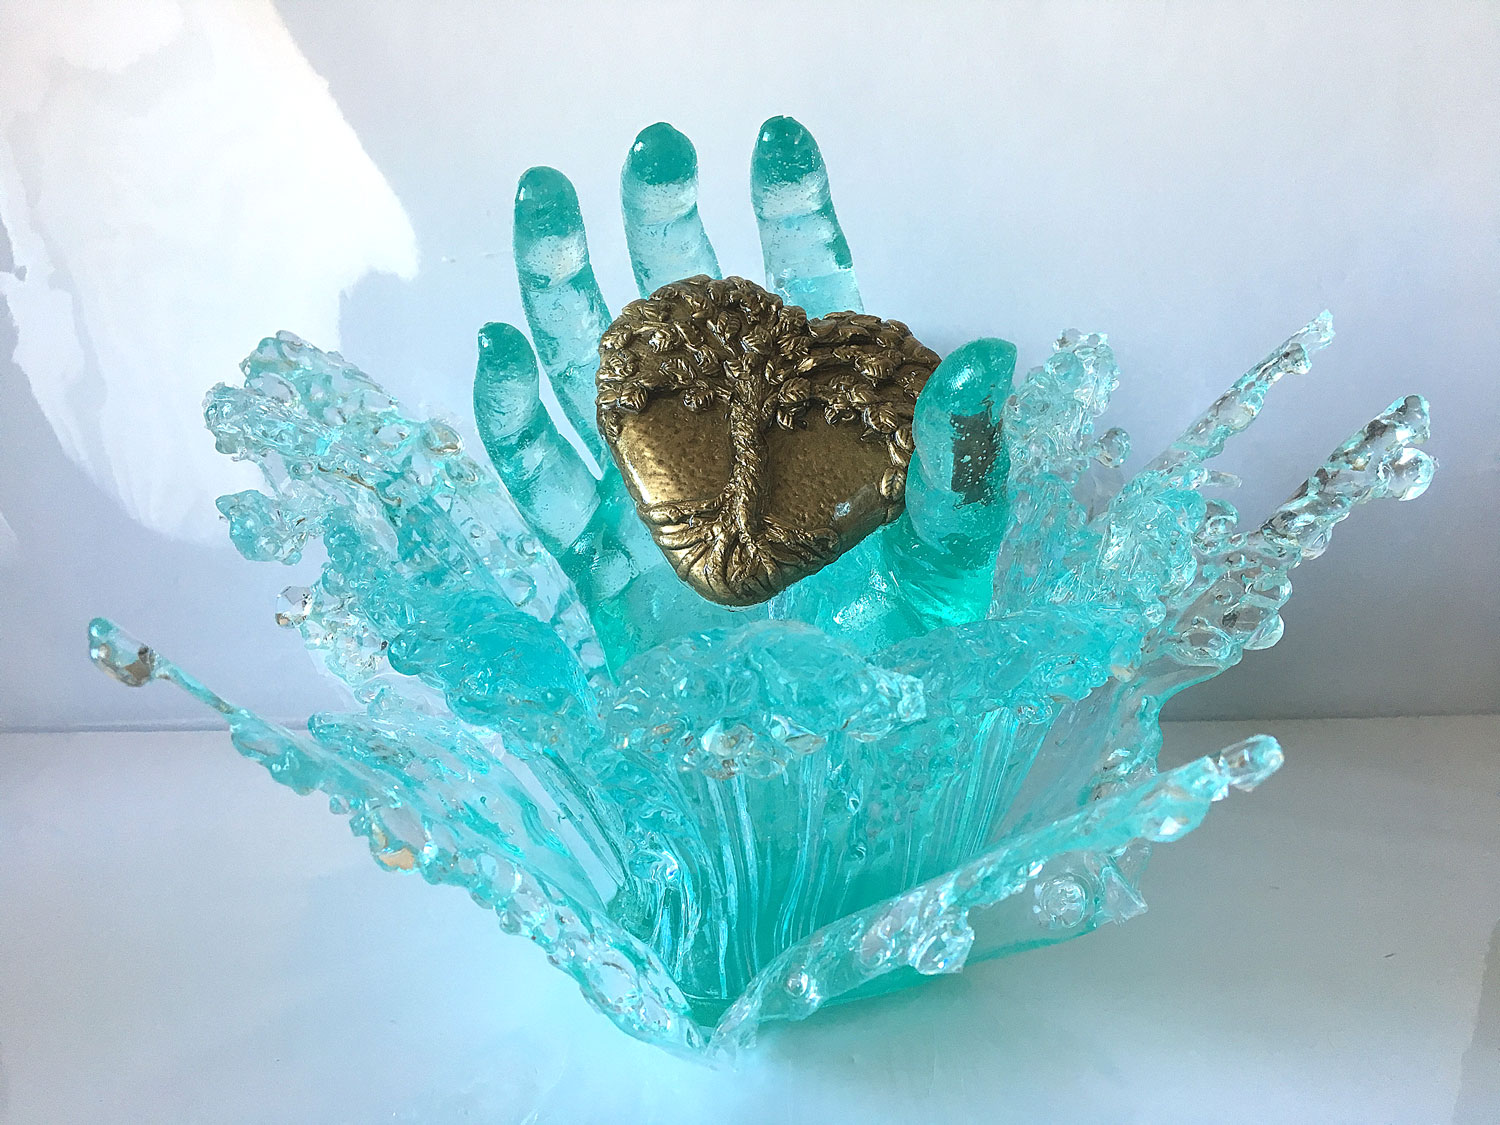 Home is where the heart is - a resin sculpture by Sue Findlay Designs